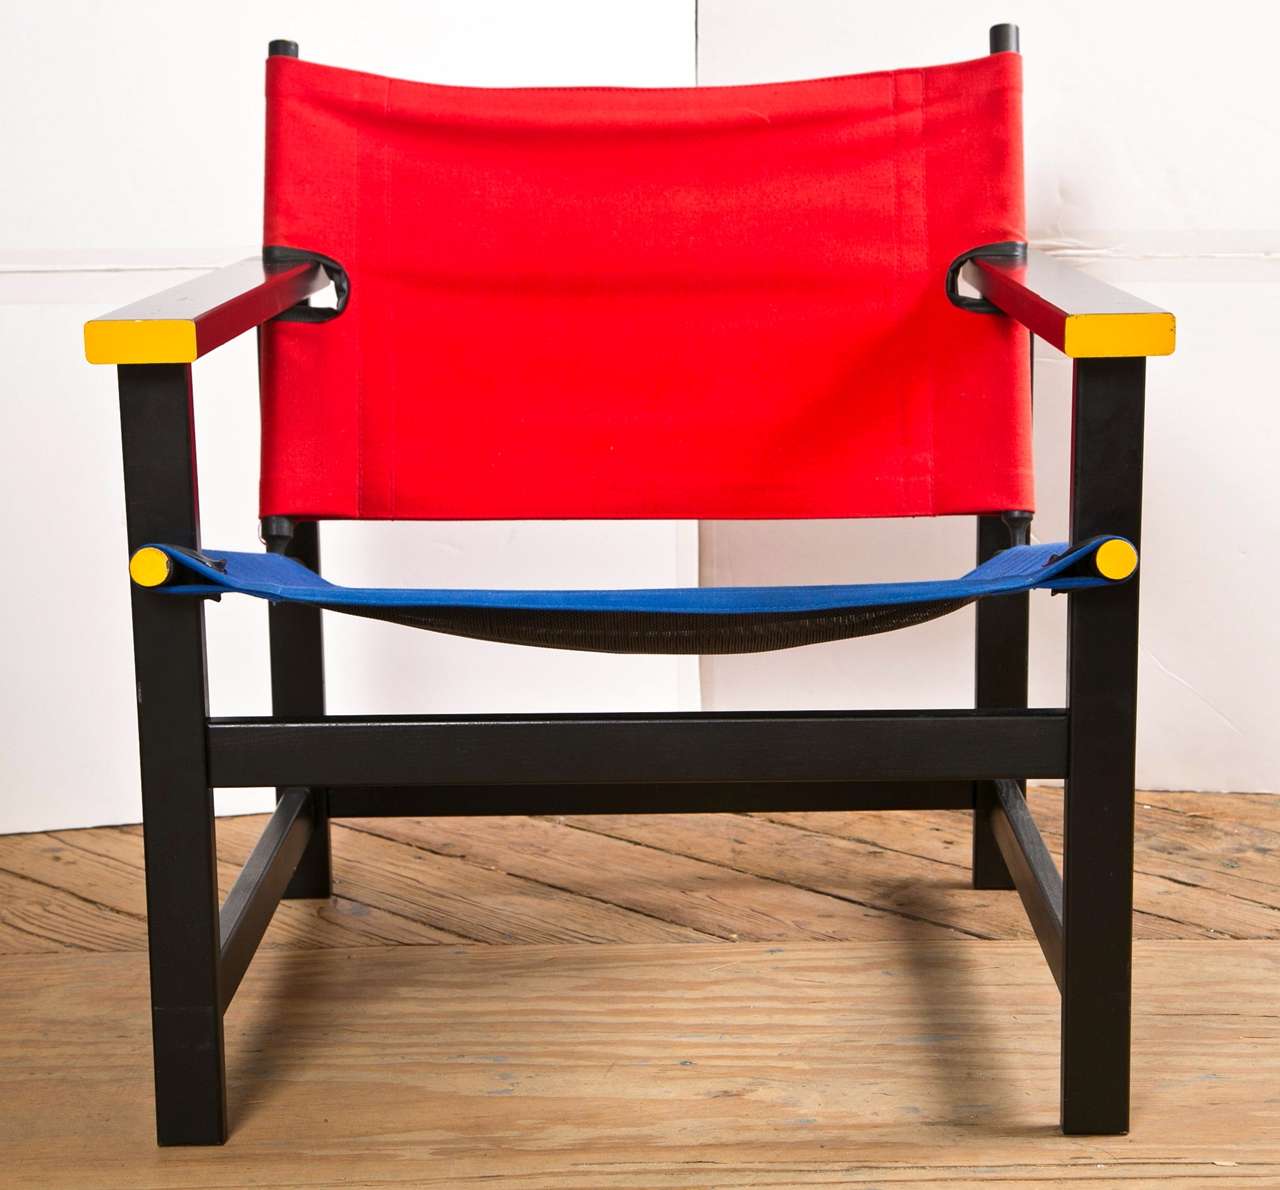 Gerrit Rietveld was a renowned Dutch furniture designer and architect. He was one of the principal members of the Dutch artistic
movement called De Stijl. He is famous for the wooden red and blue
chair.
This is a canvas seat and back chair used